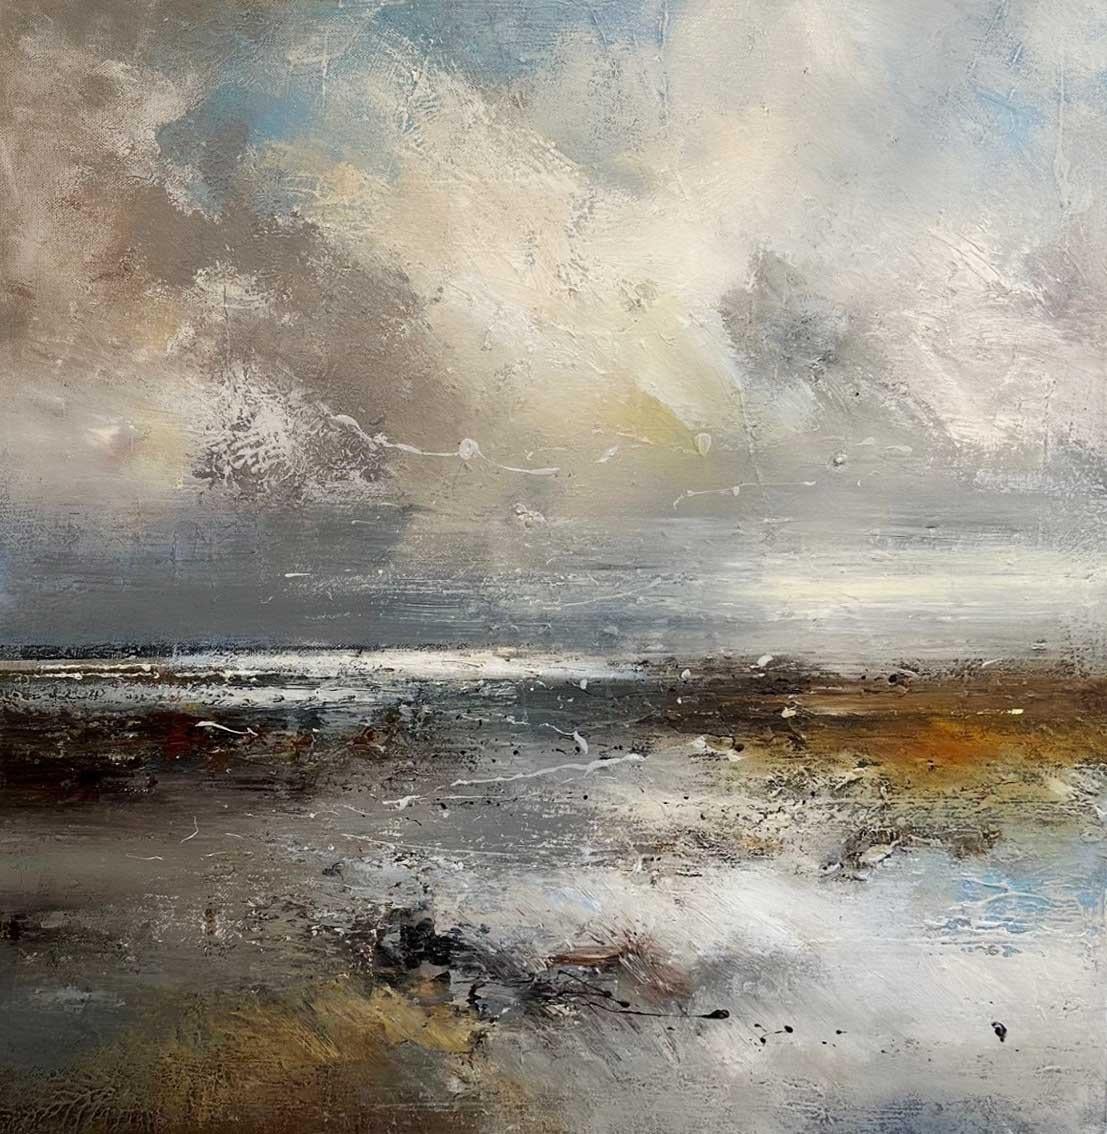 Claire Wiltsher Figurative Painting - Cloud Watching - Figurative British Landscape / Oil Paint on Canvas